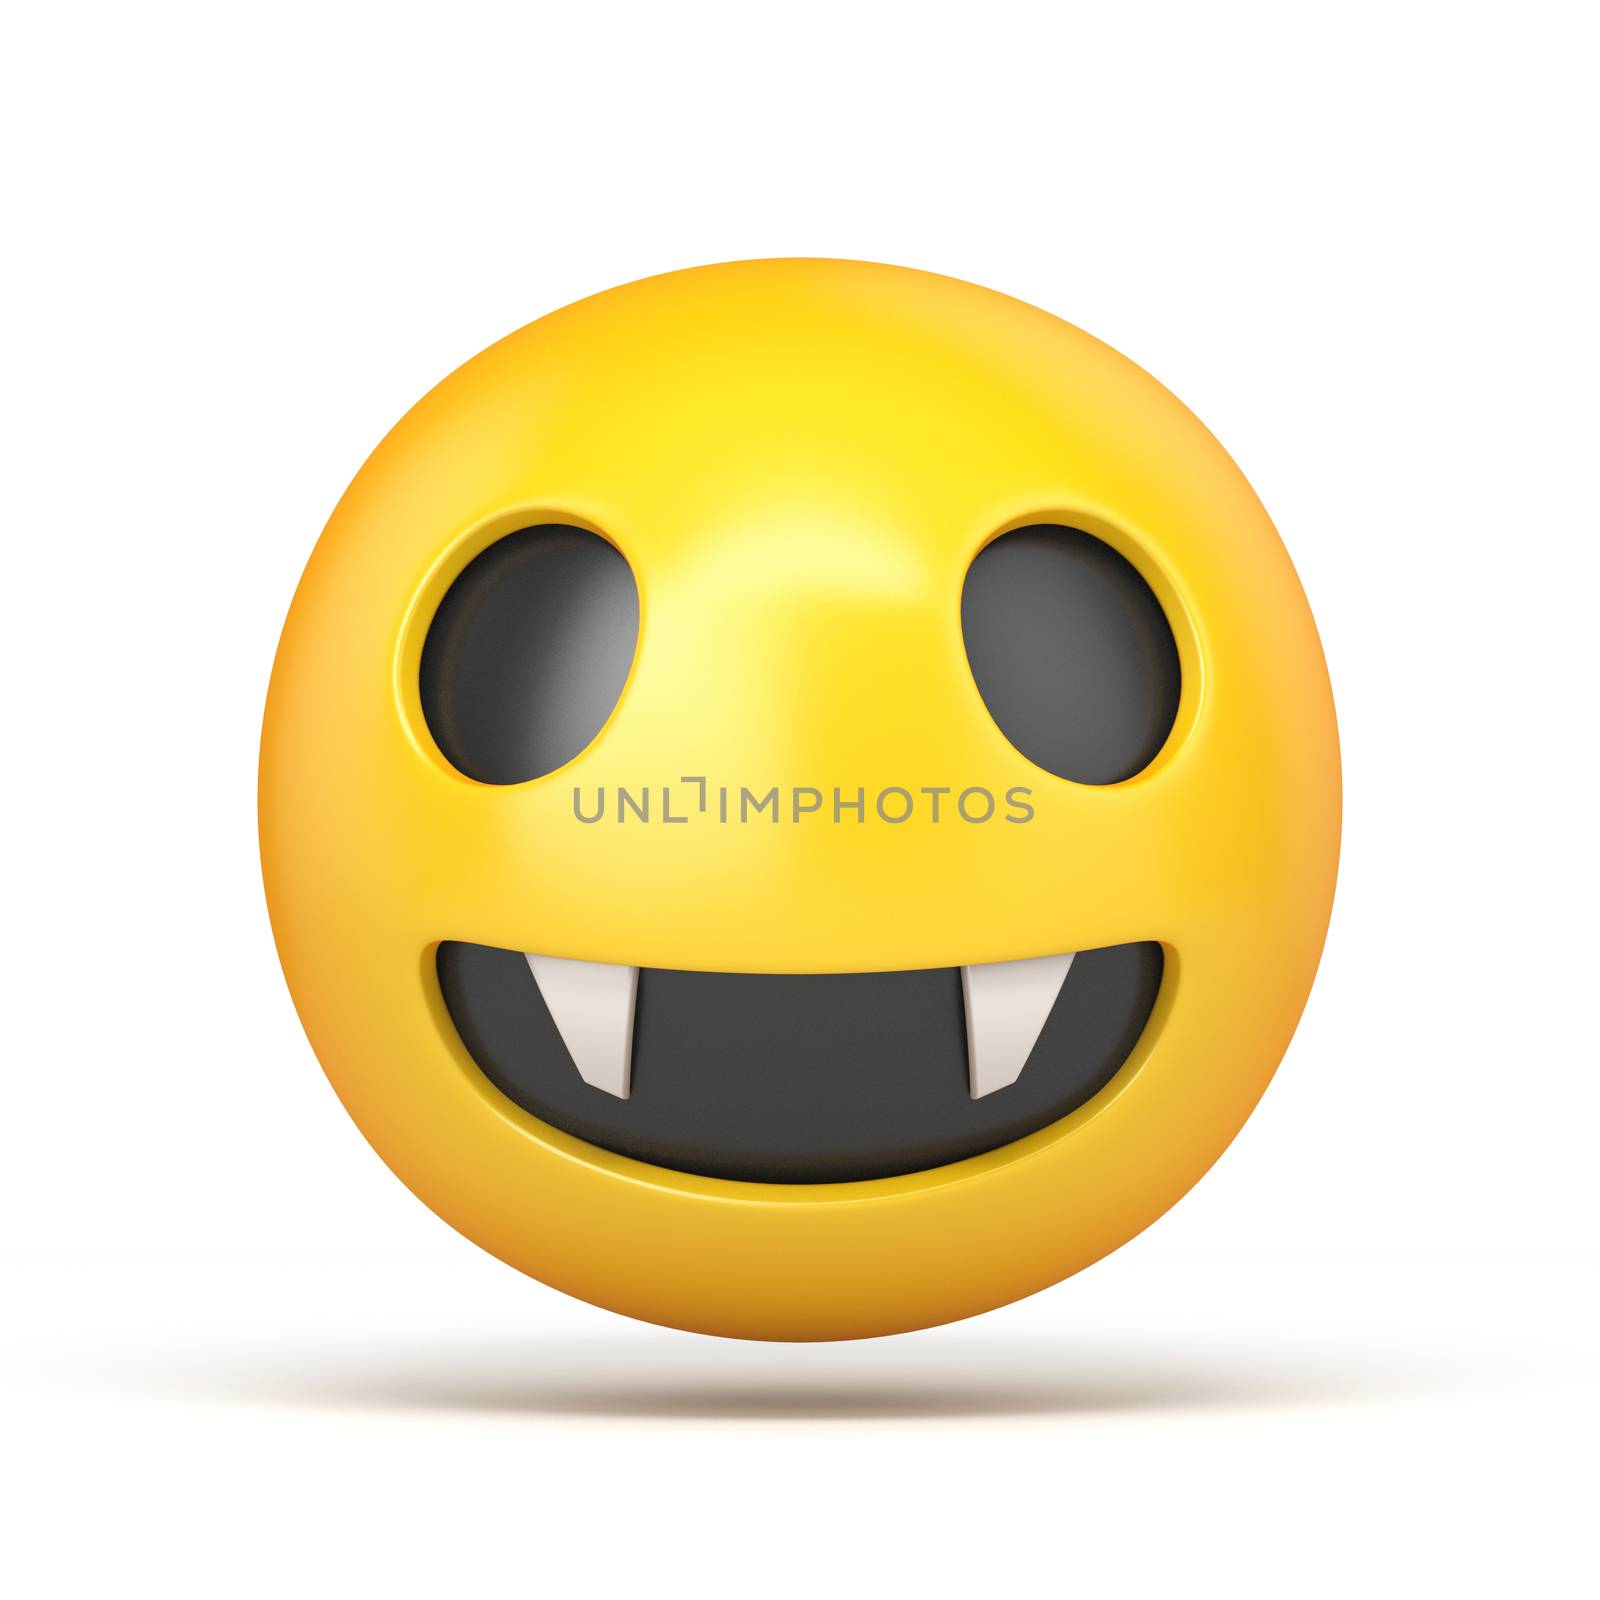 Vampire emoticon 3D rendering illustration isolated on white background